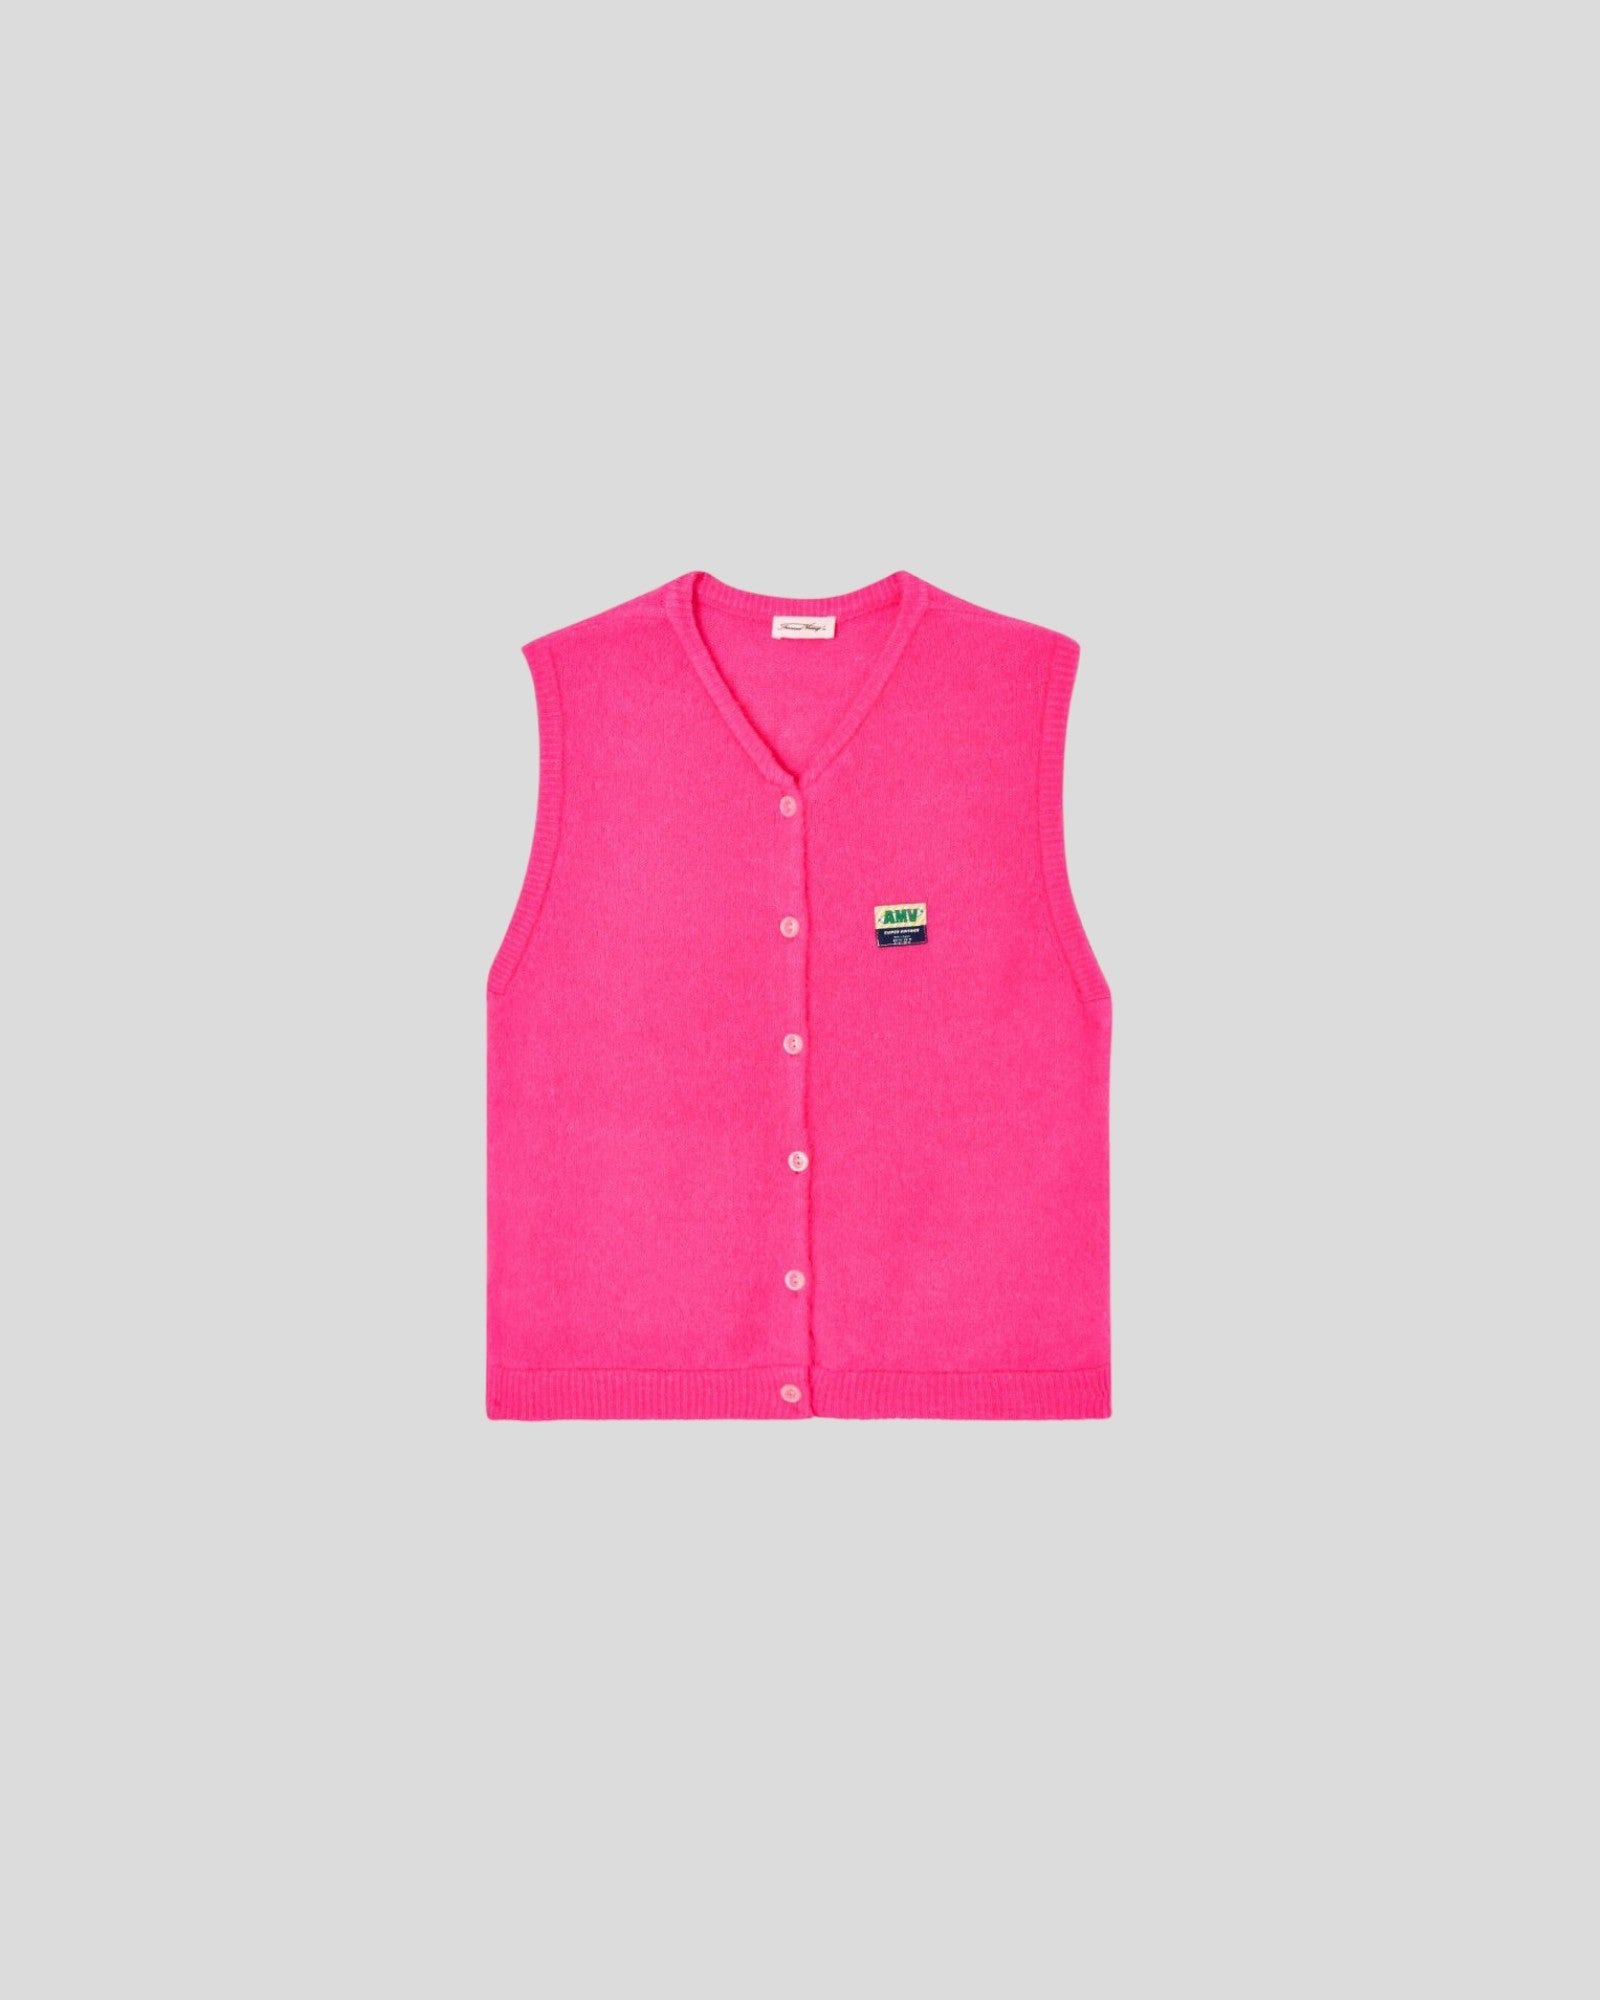 American Vintage || Vitow Gilet - Rose Fluo Chiné